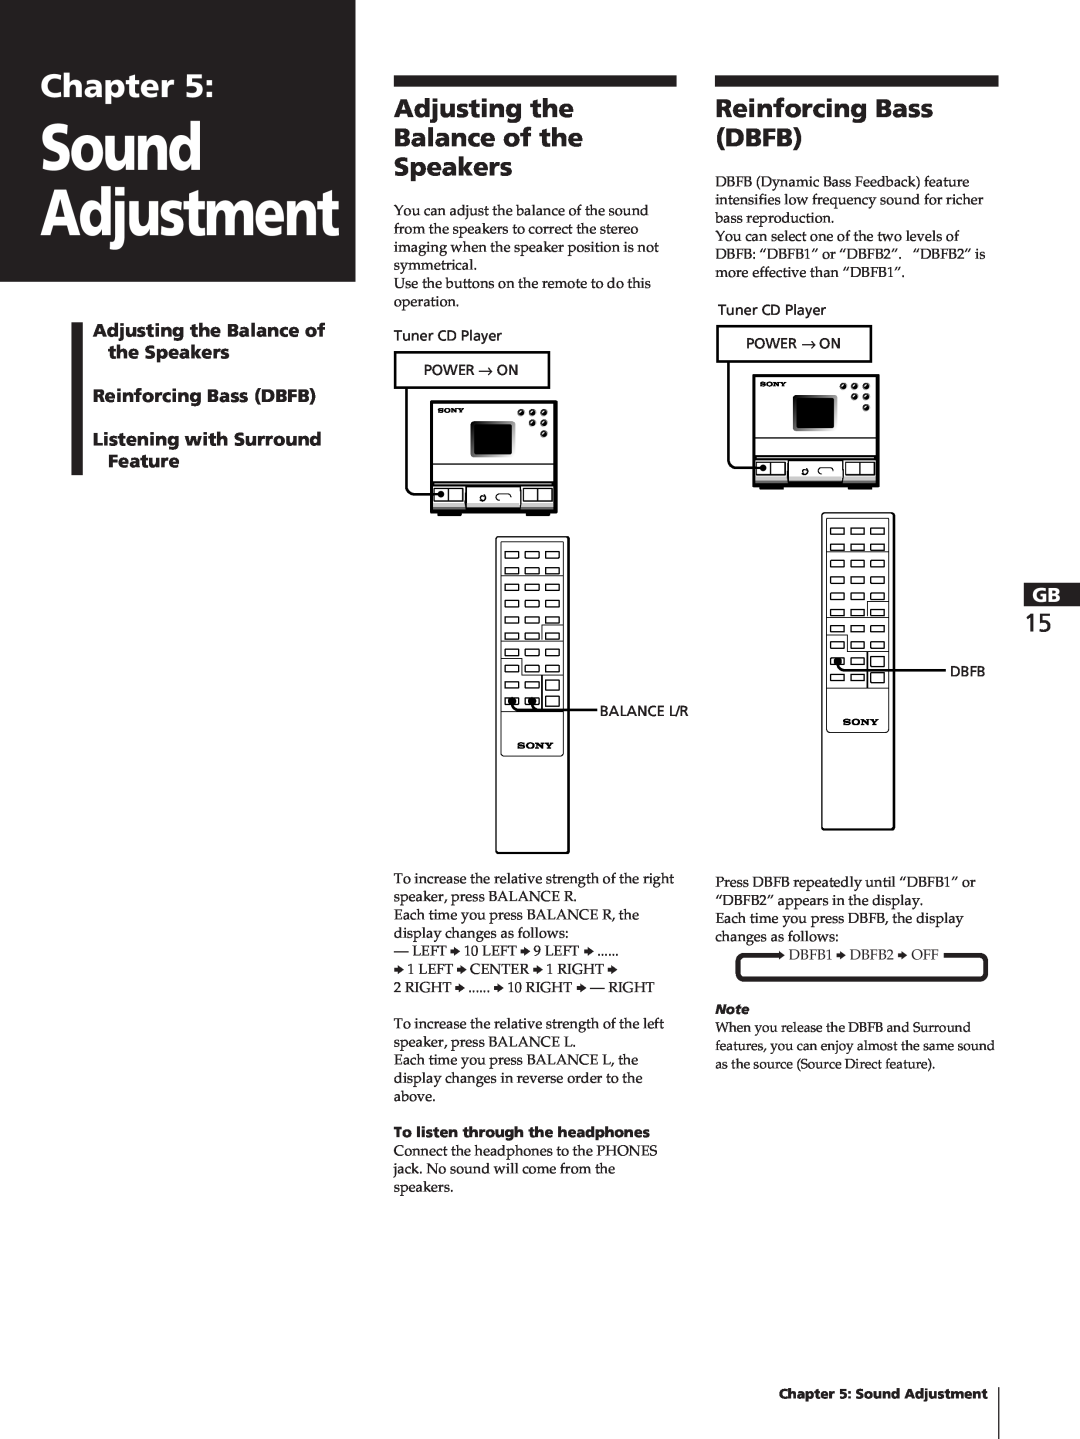 Sony TC-TX1, SA-N11, HCD-T1 manual Sound Adjustment, Chapter, Adjusting the Balance of the Speakers, Reinforcing Bass DBFB 